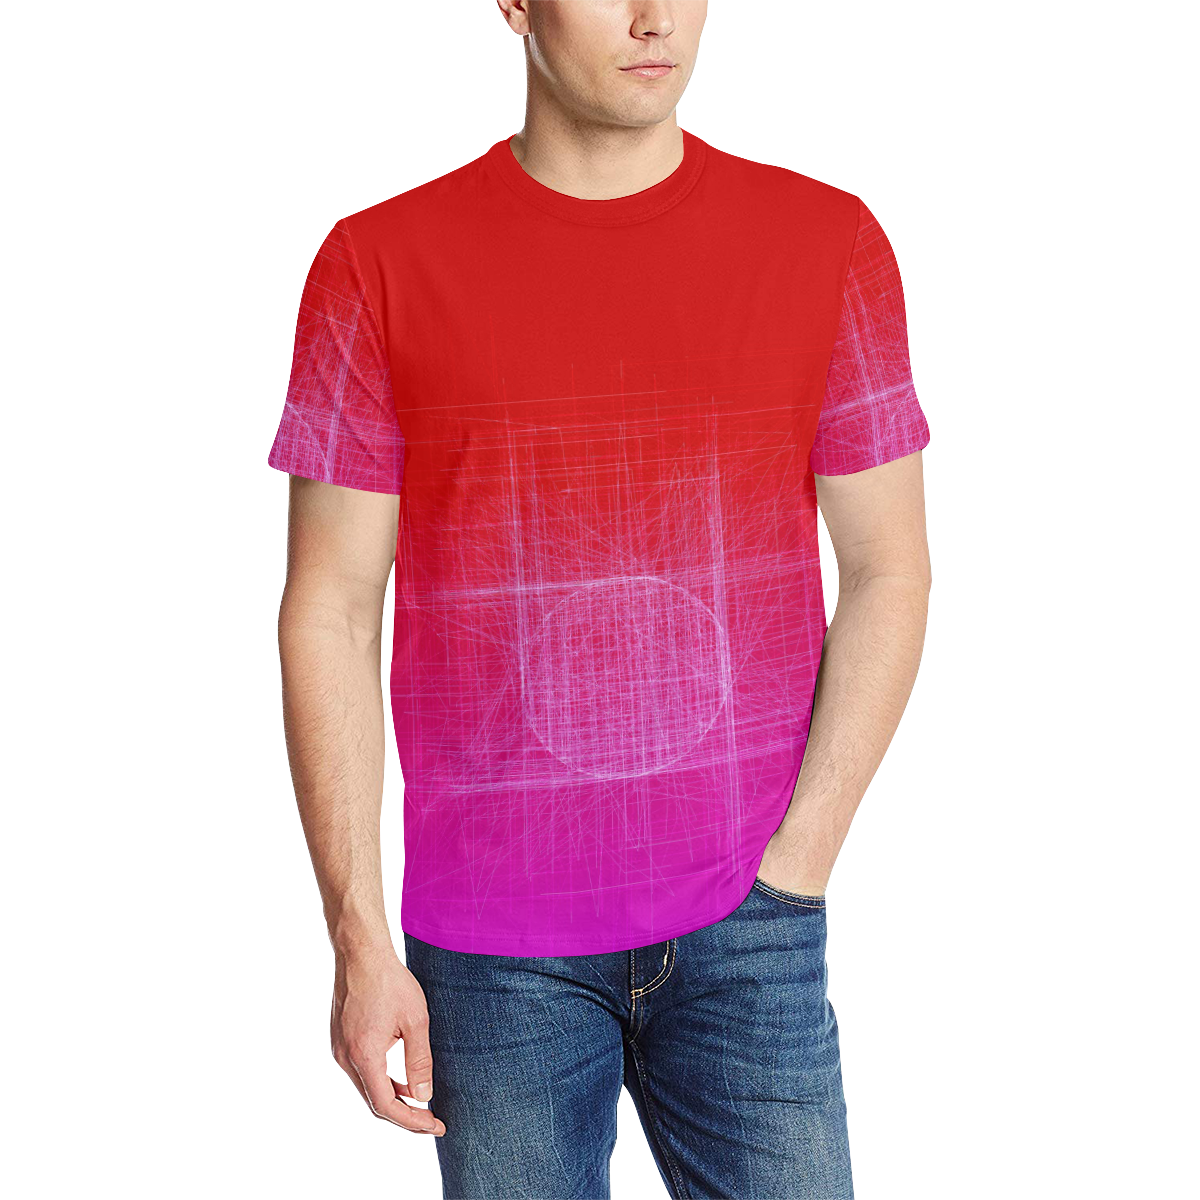 Hot Mess, Red, Pink and Purple Retro Glitch Men's All Over Print T-Shirt (Solid Color Neck) (Model T63)